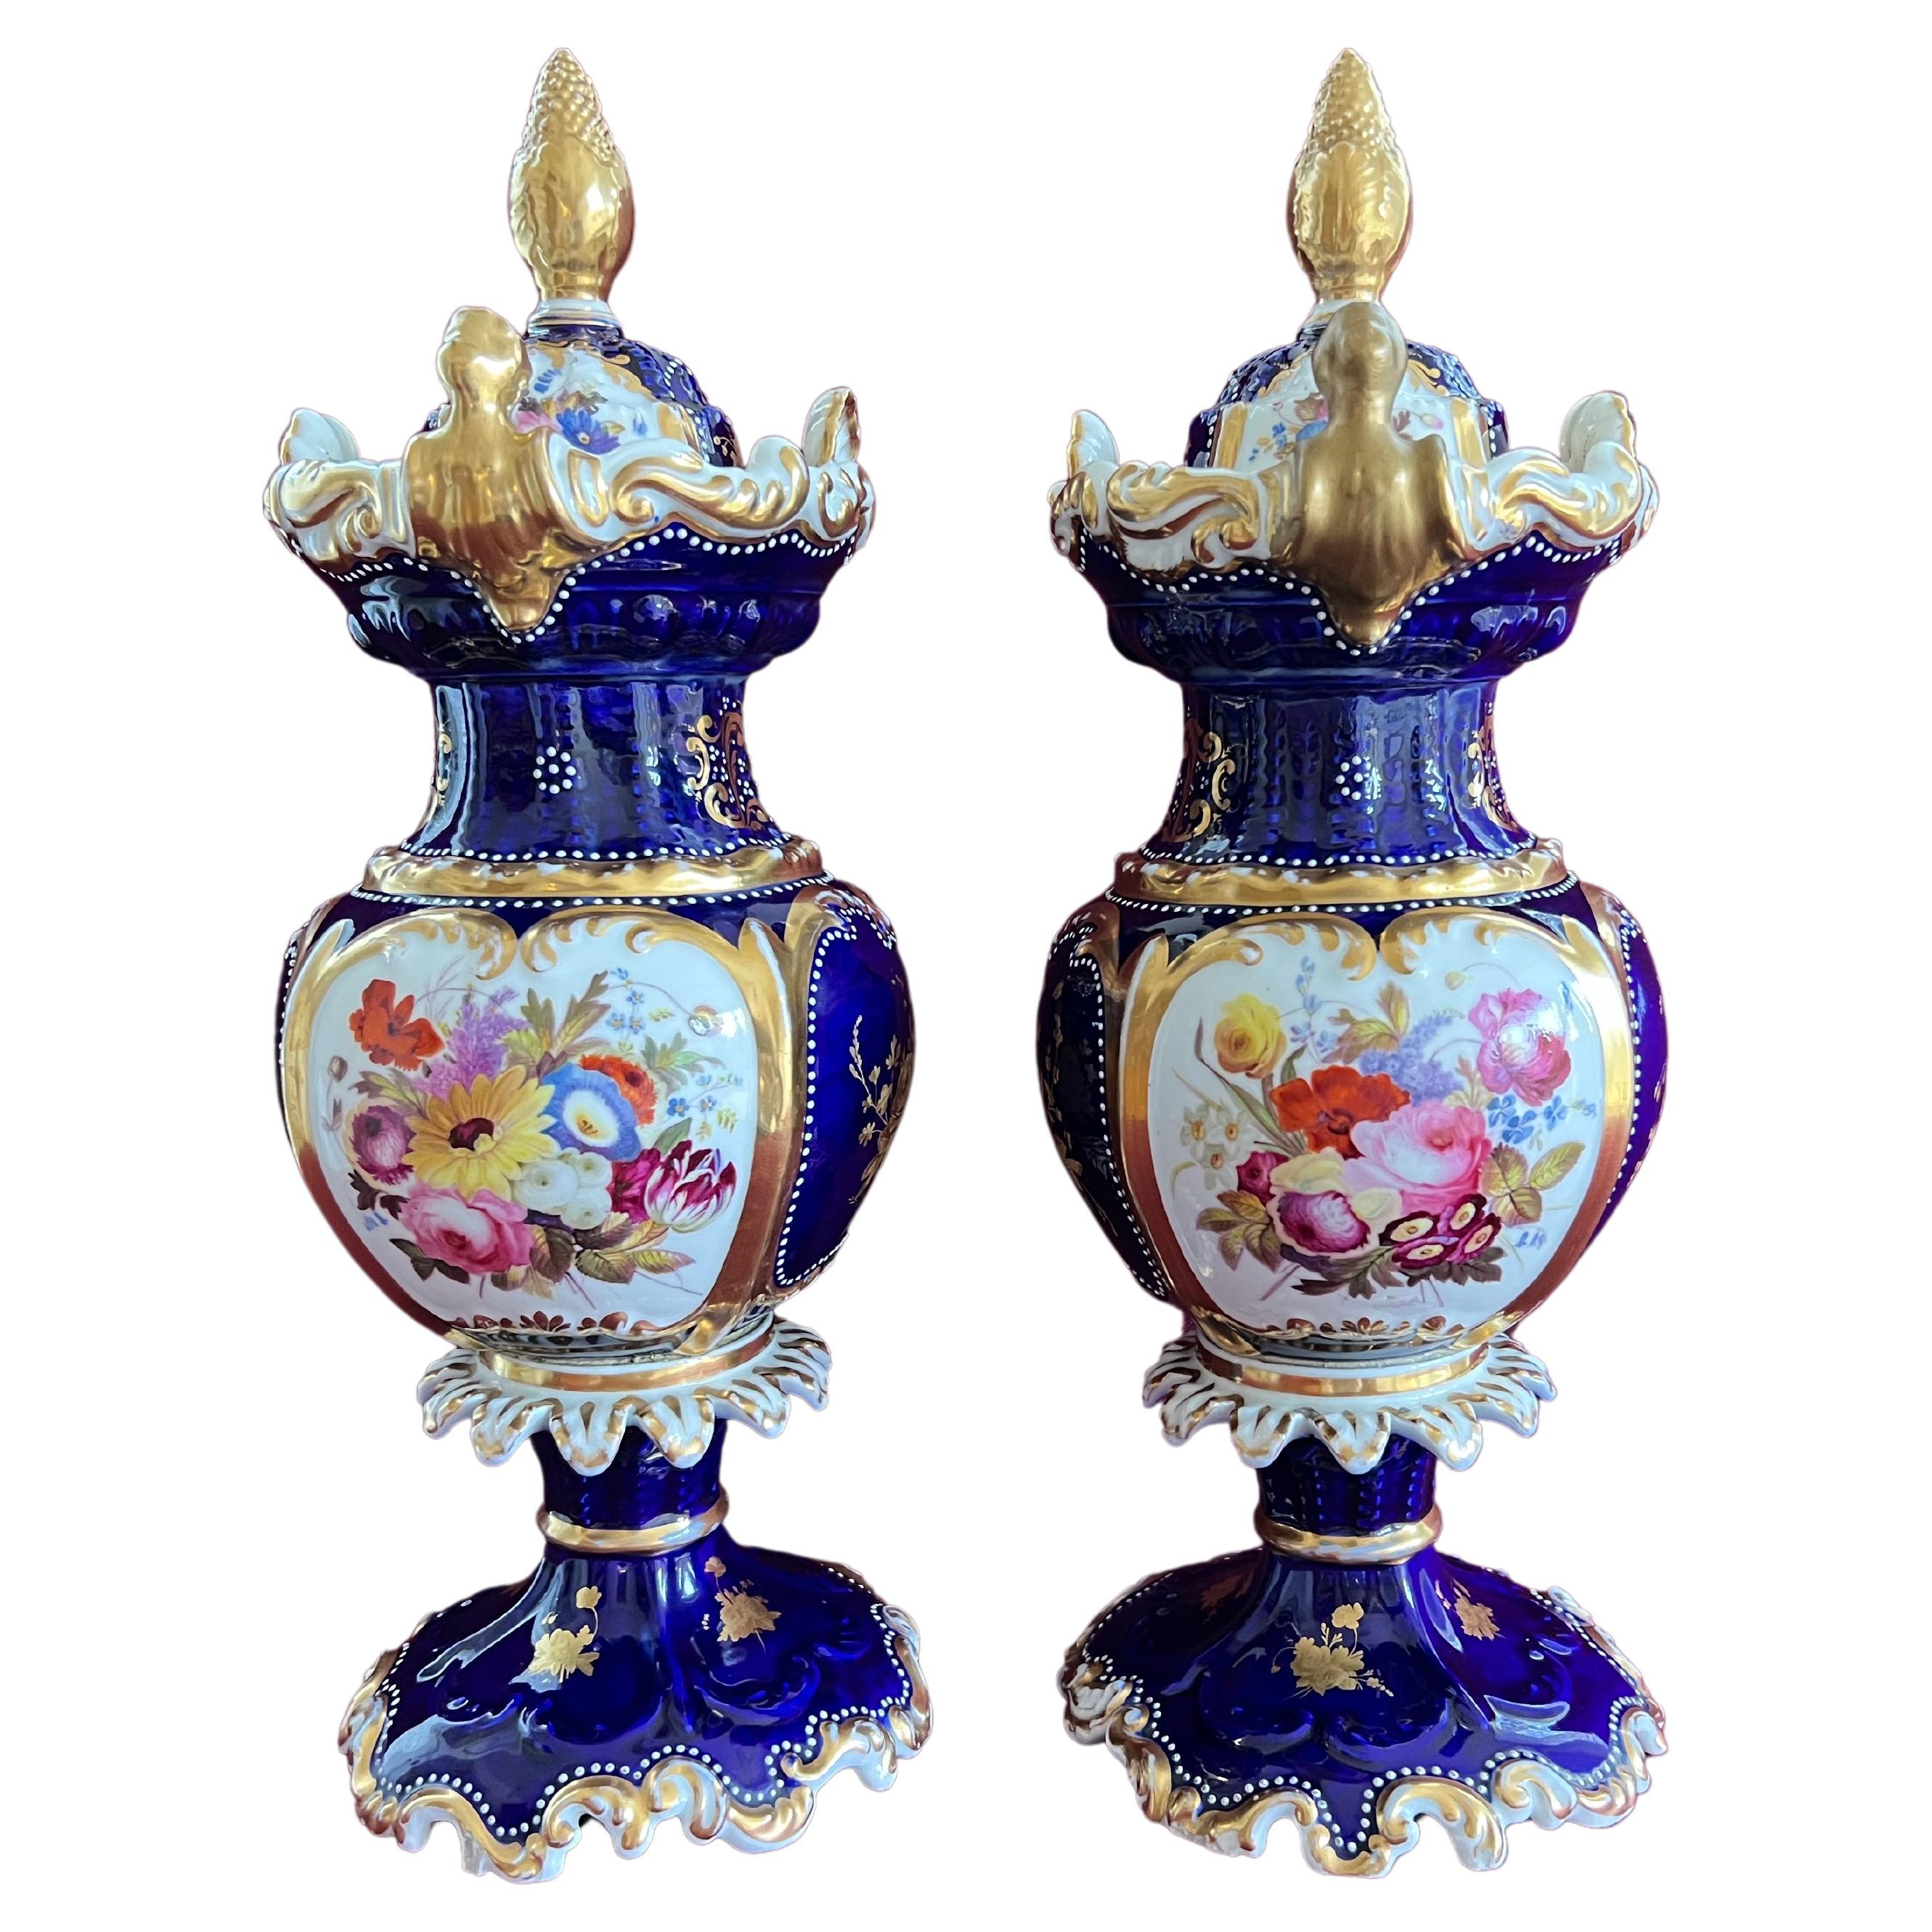 Tall Pair of Chamberlain Worcester Porcelain Vases, circa 1842-1845 For Sale